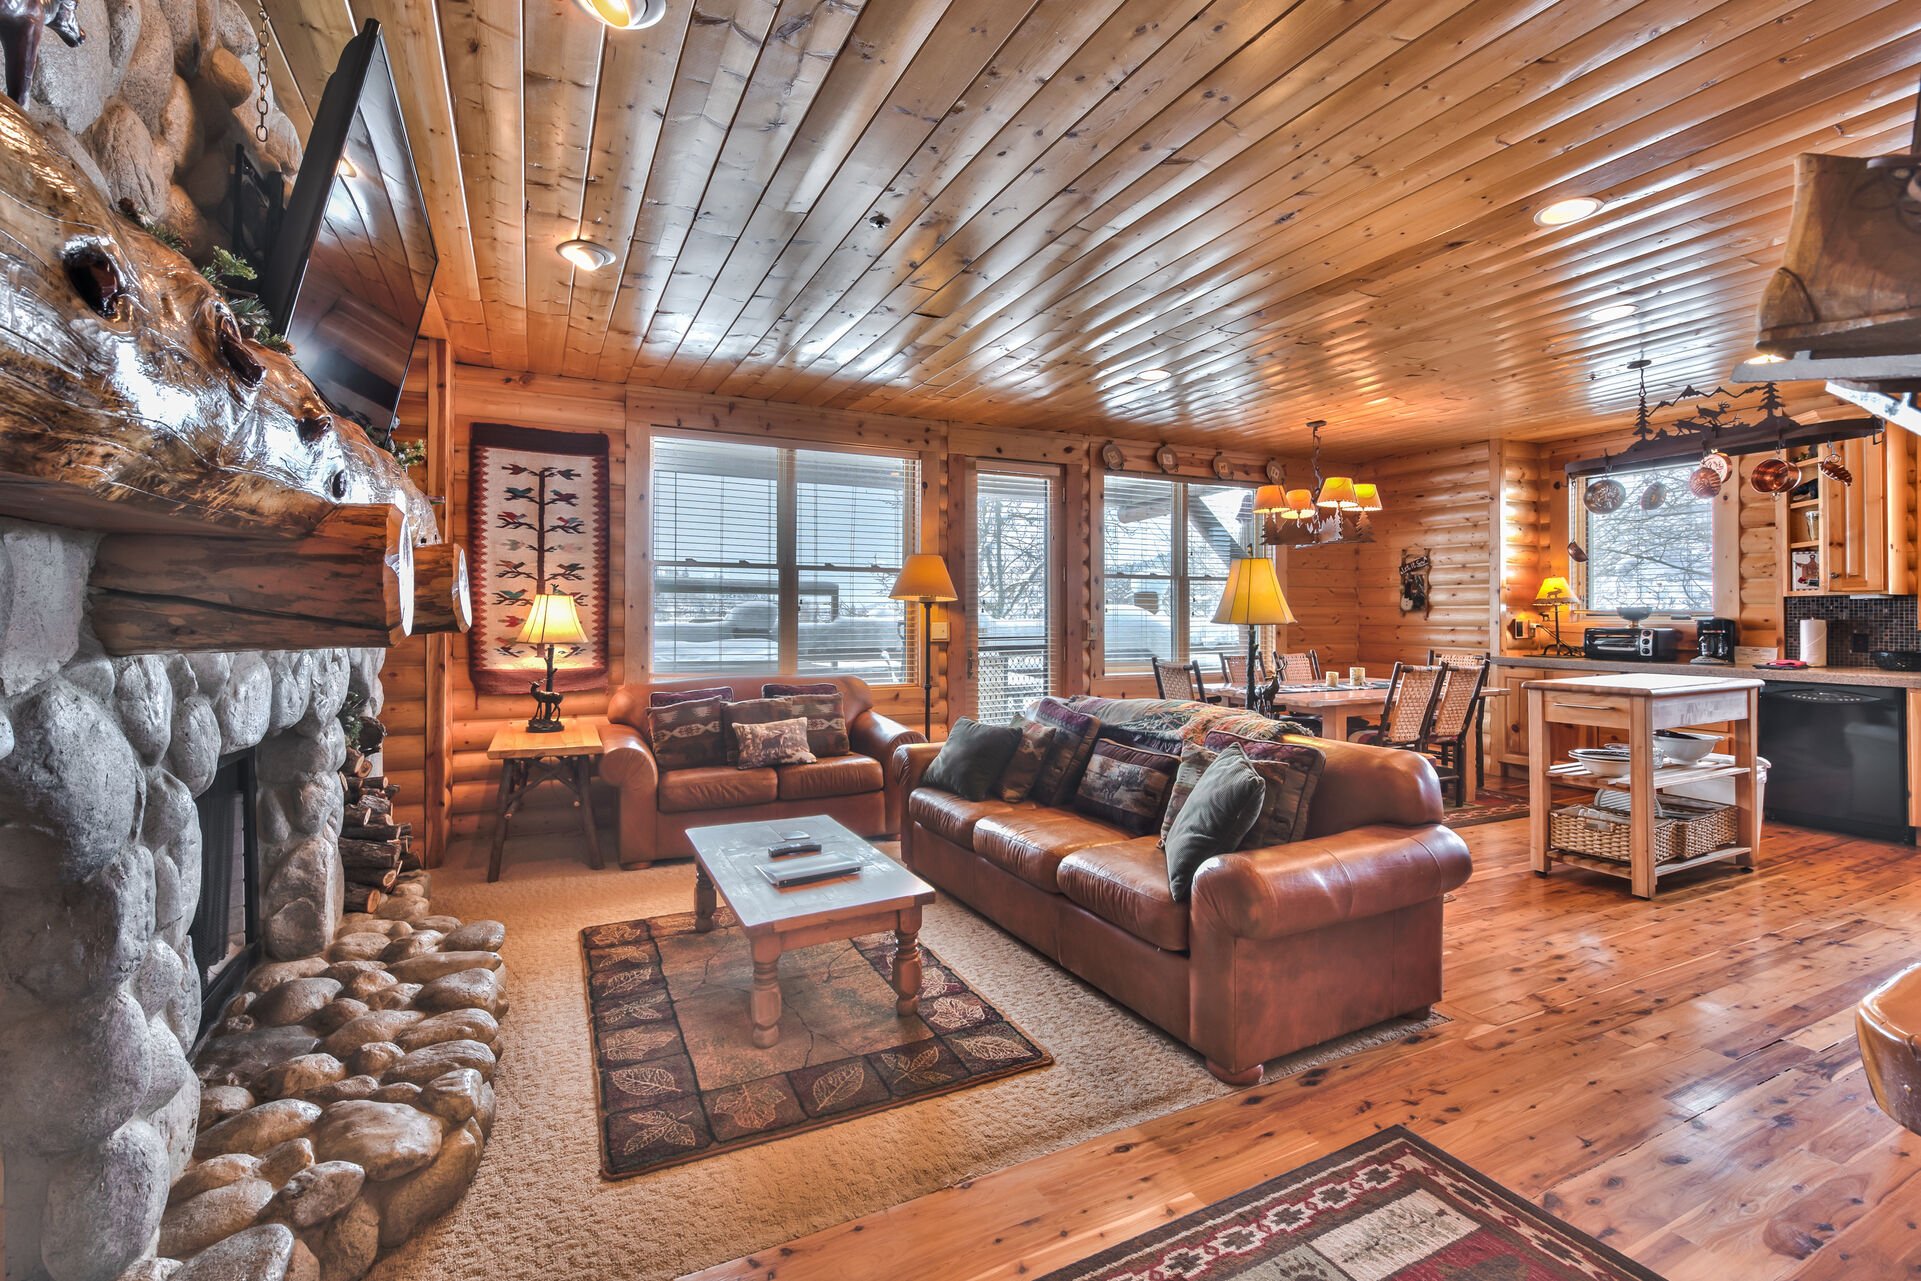 Log Cabin Design Condo with Great Room featuring a Living Room with a Stone Fireplace, Fully Equipped Kitchen, Dining Area, Hardwood Floors, and Private Deck